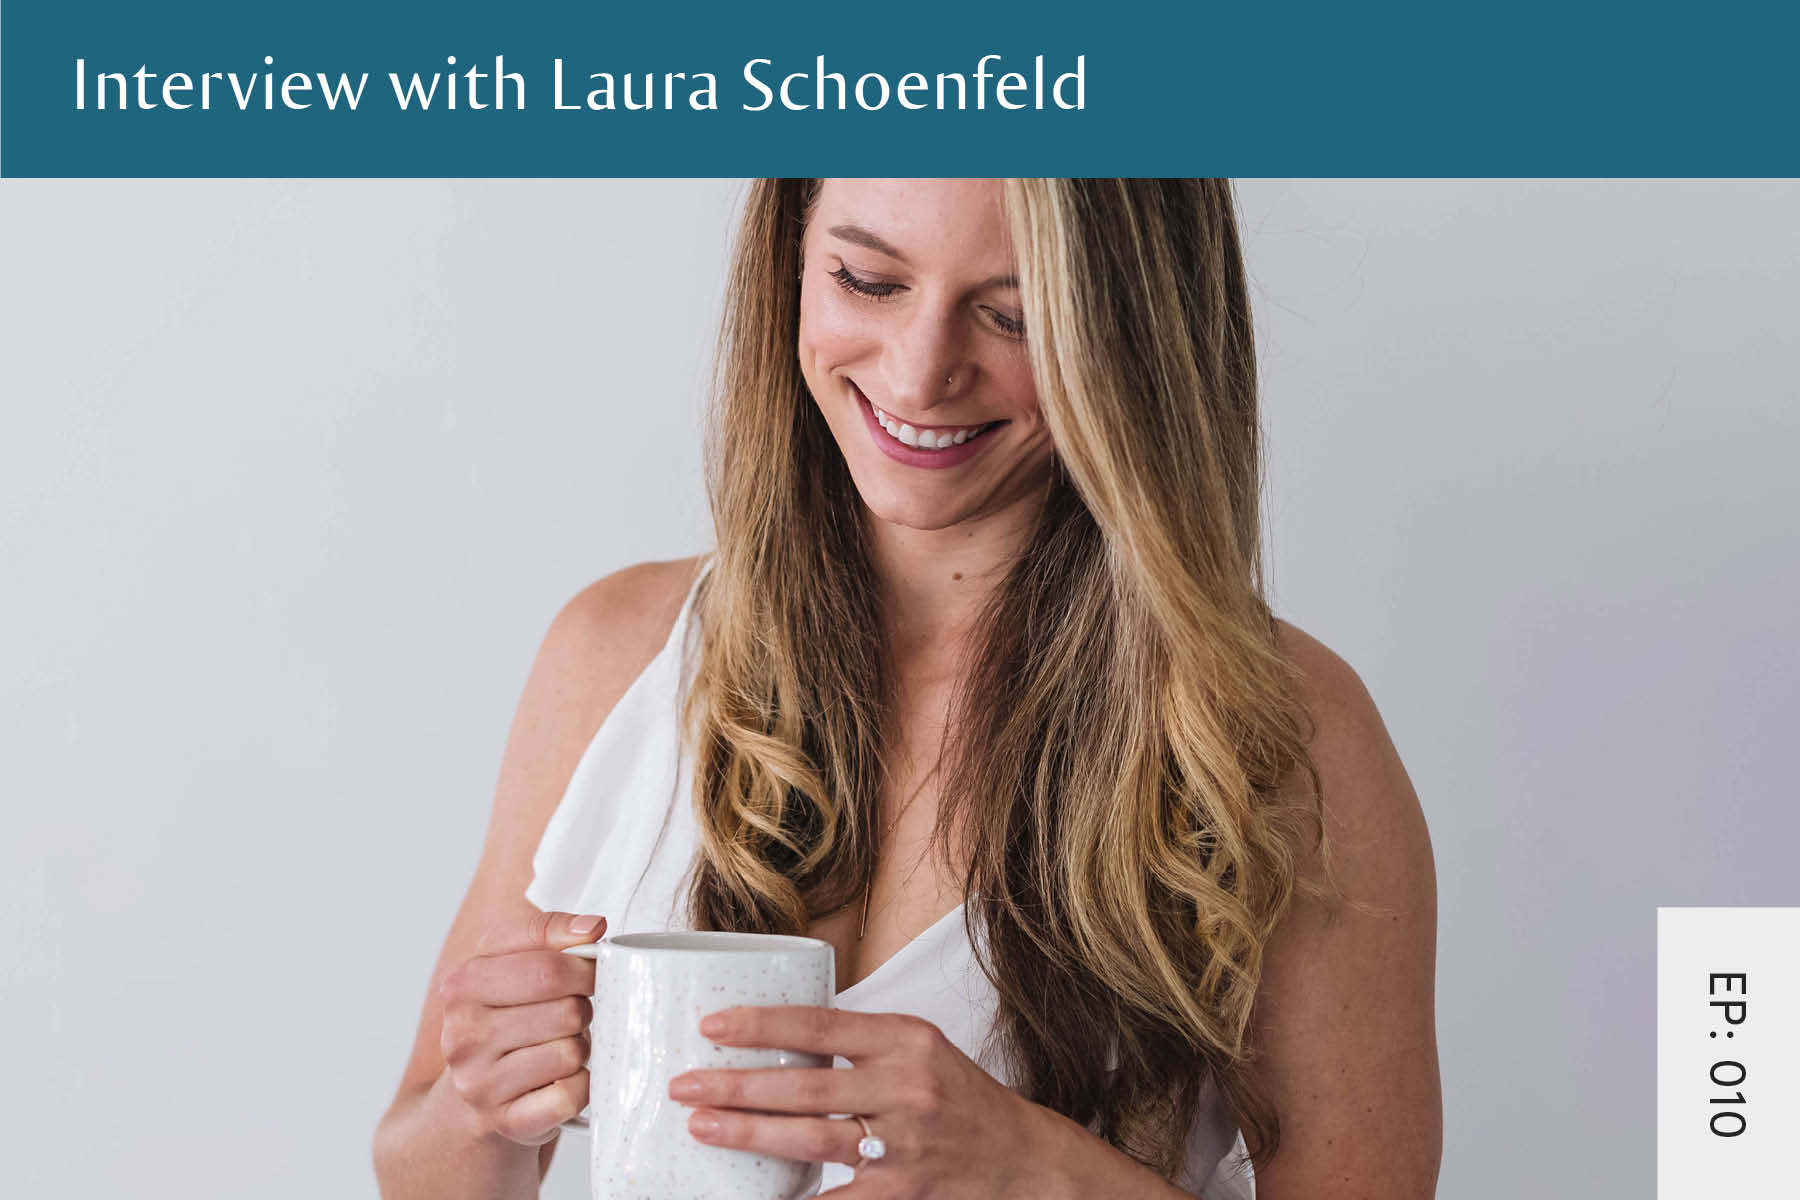 010: Interview with Laura Schoenfeld - Seven Health: Eating Disorder Recovery and Anti Diet Nutritionist